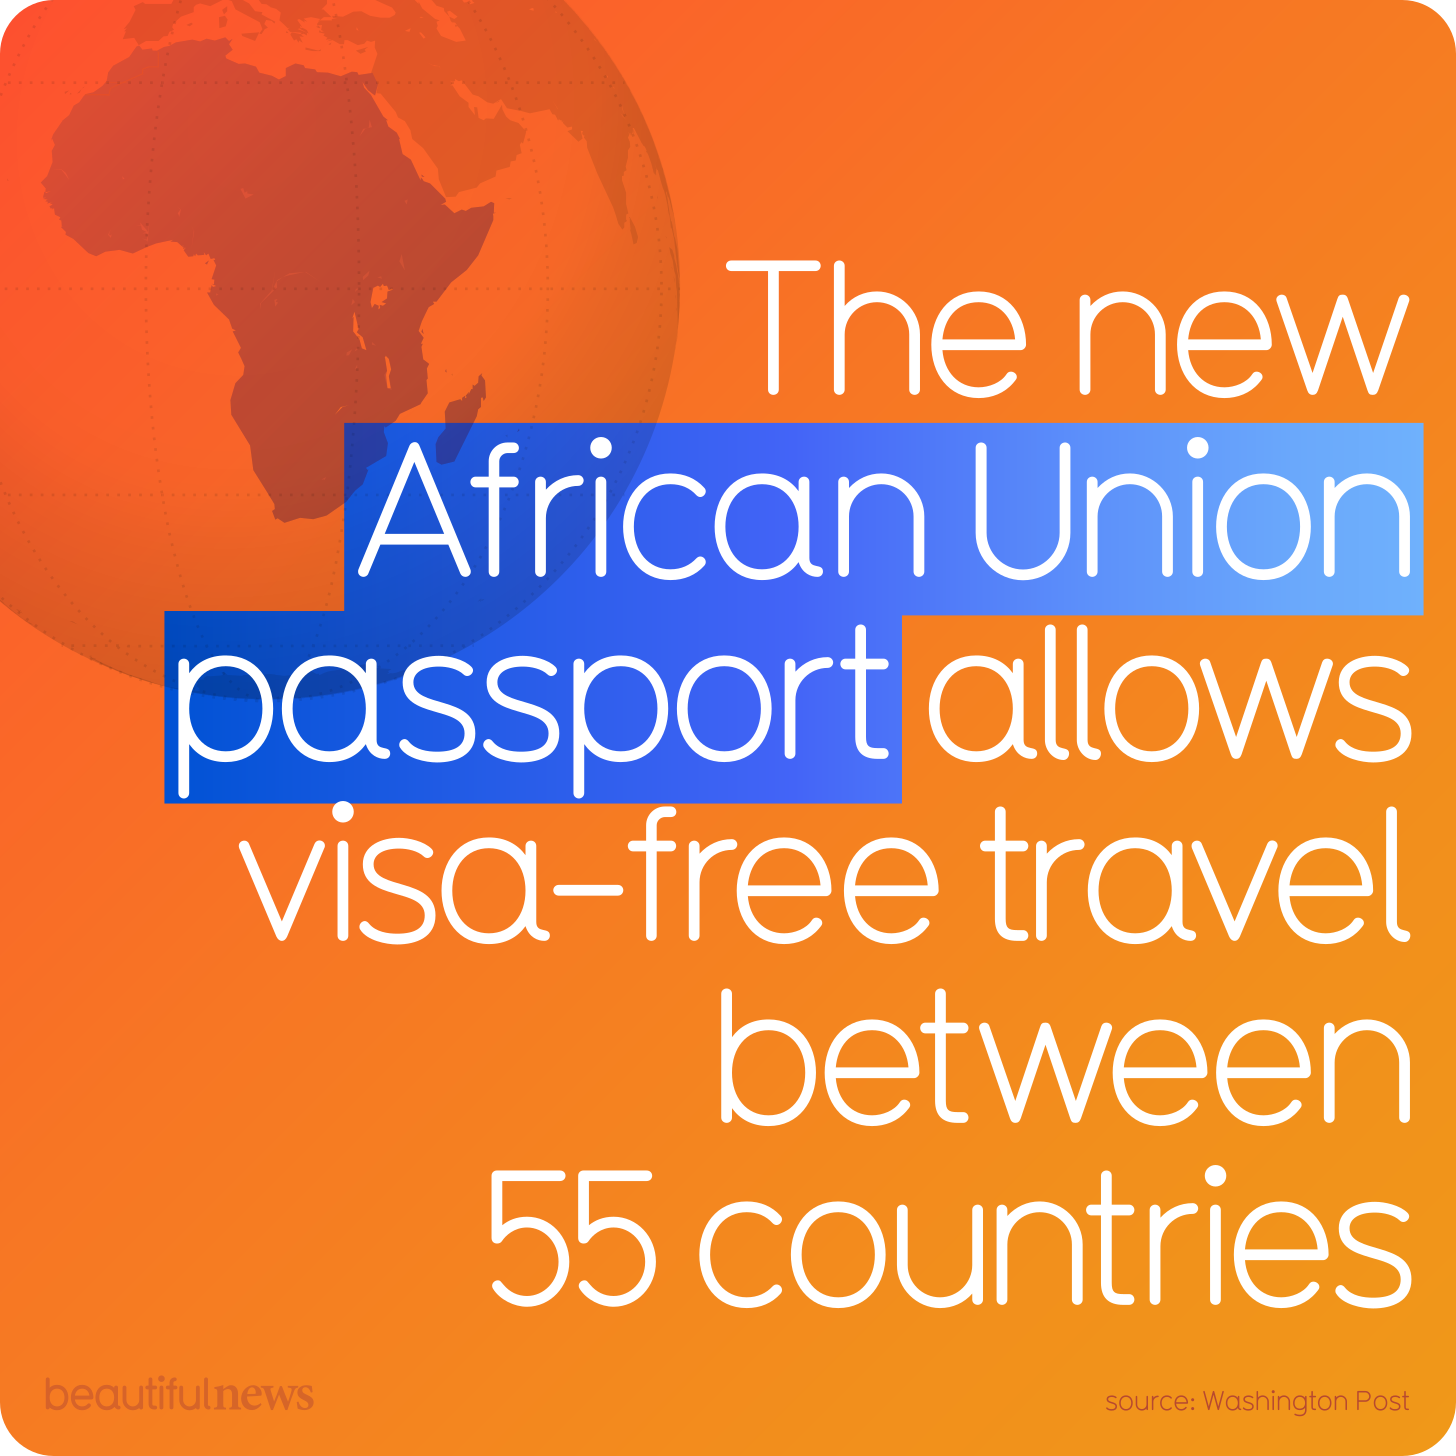 The New African Union Passport Allows Visa-Free Travel Between 55 Countries